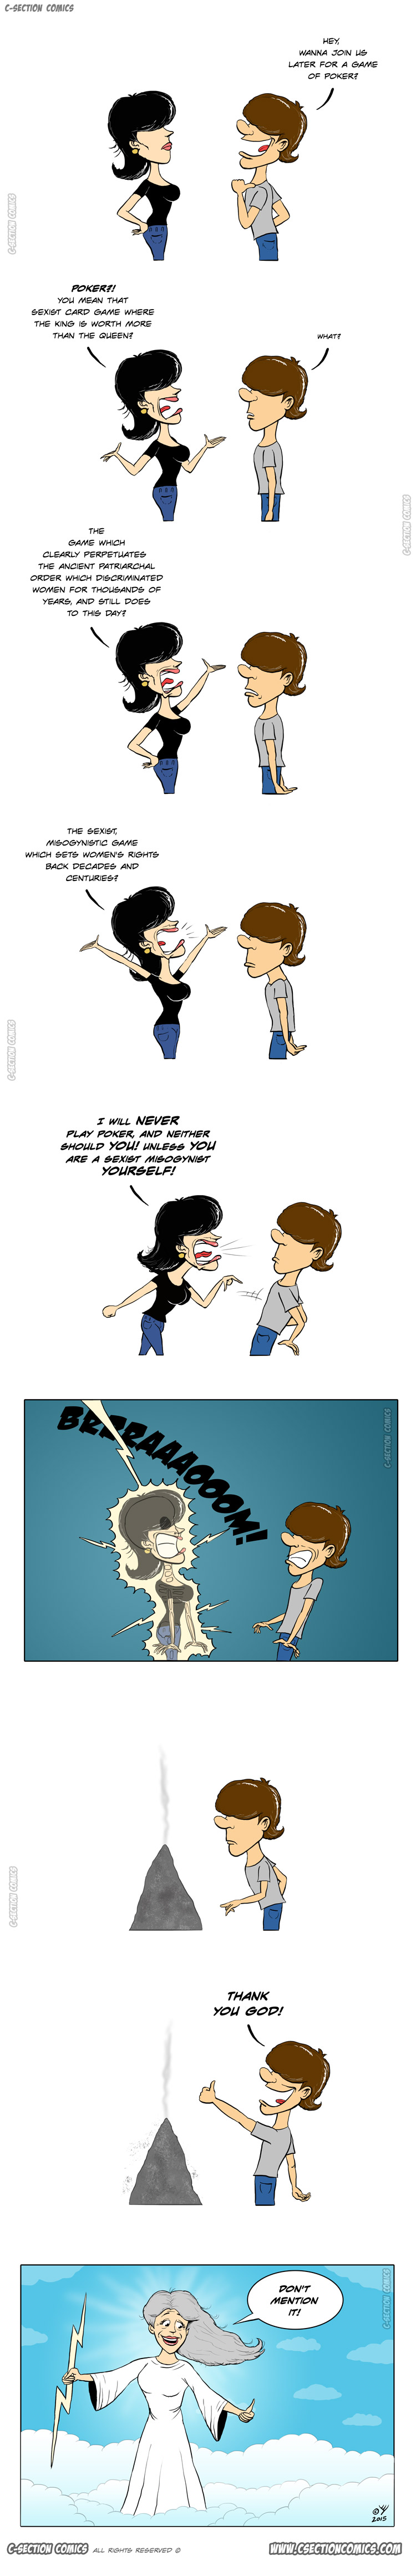 Girl Power - A cartoon on extreme feminists by C-Section Comics